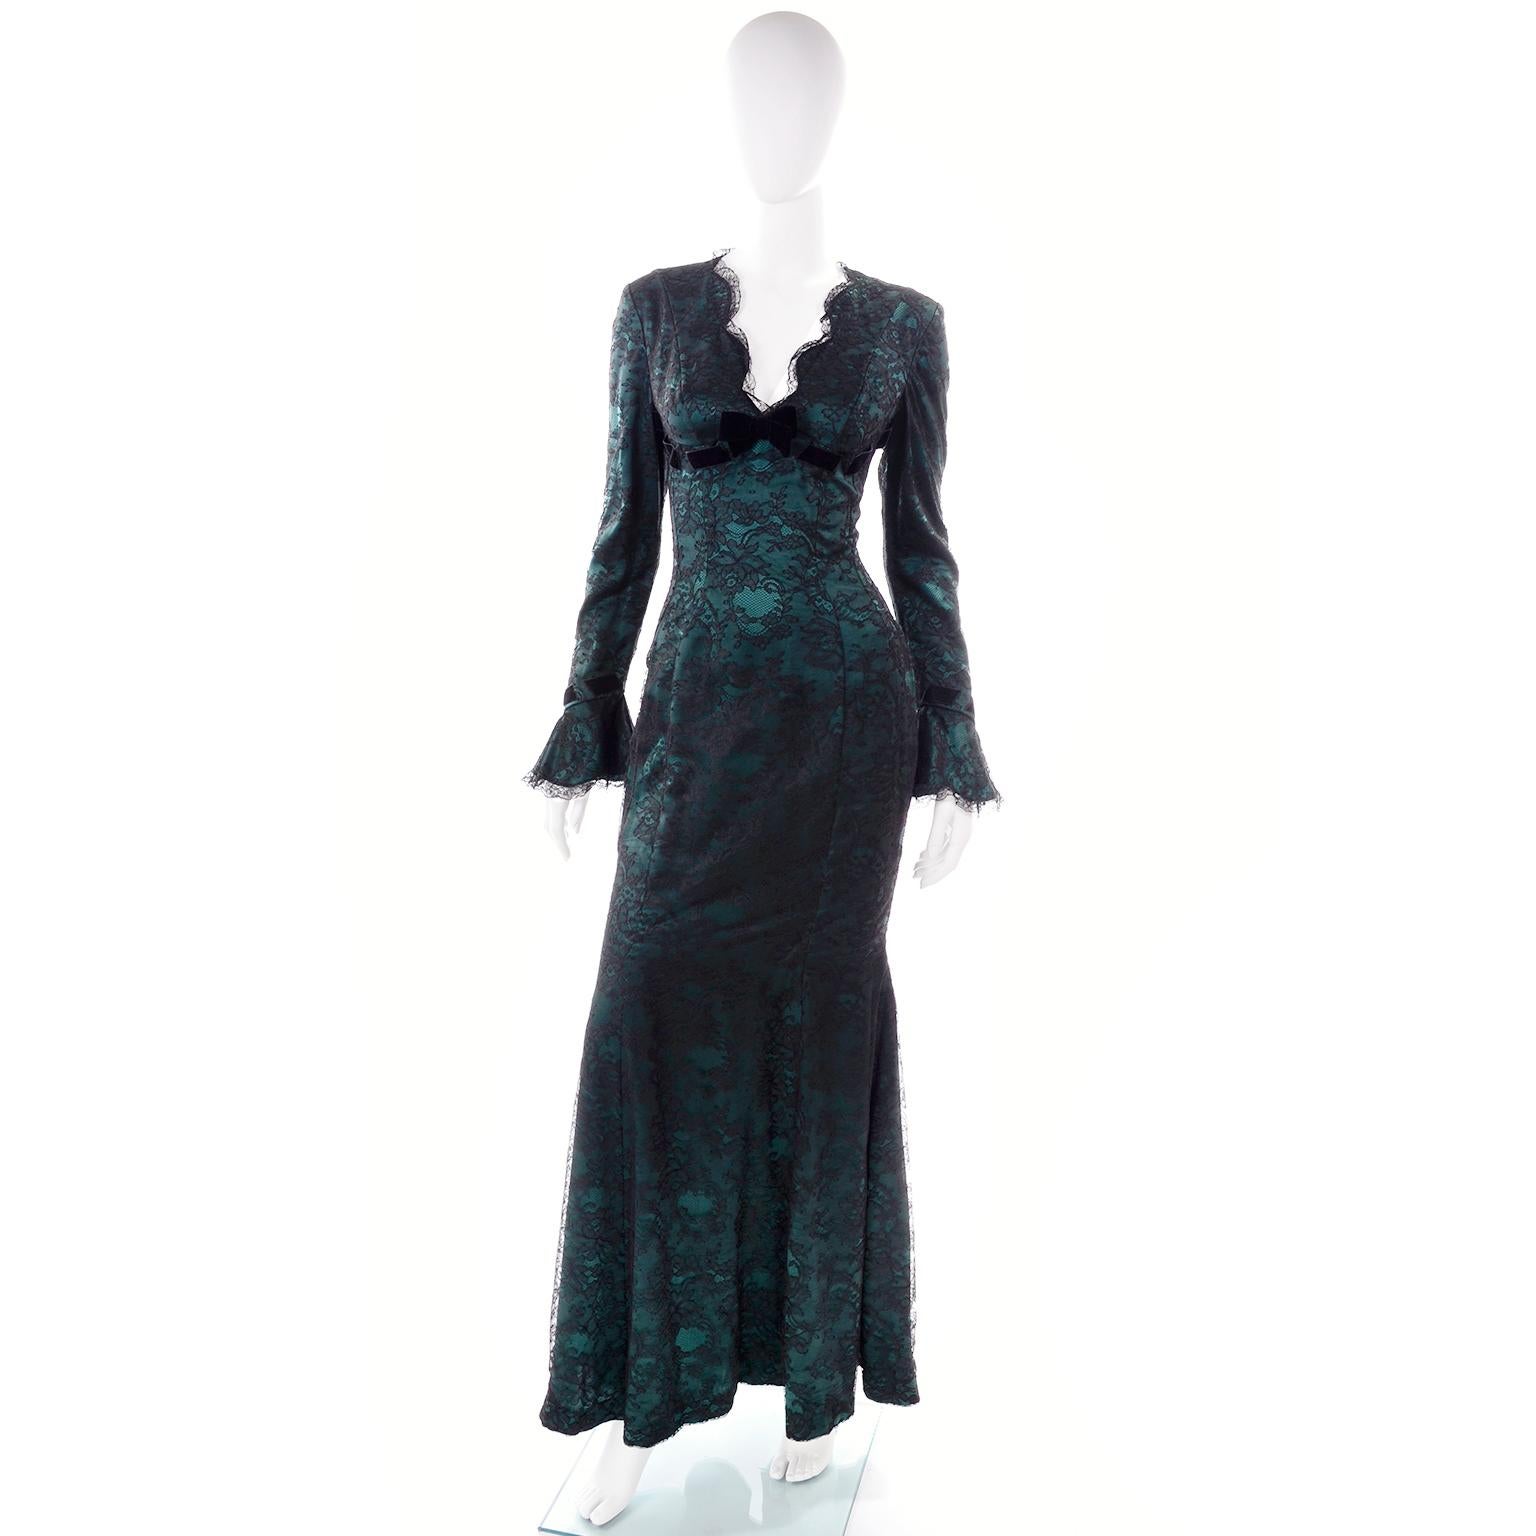 This is an incredible vintage full length green evening dress from Thierry Mugler. We have always loved Thierry Mugler and we have been buying his pieces for decades. This rare vintage evening gown is exceptional and we love the low scalloped V neck